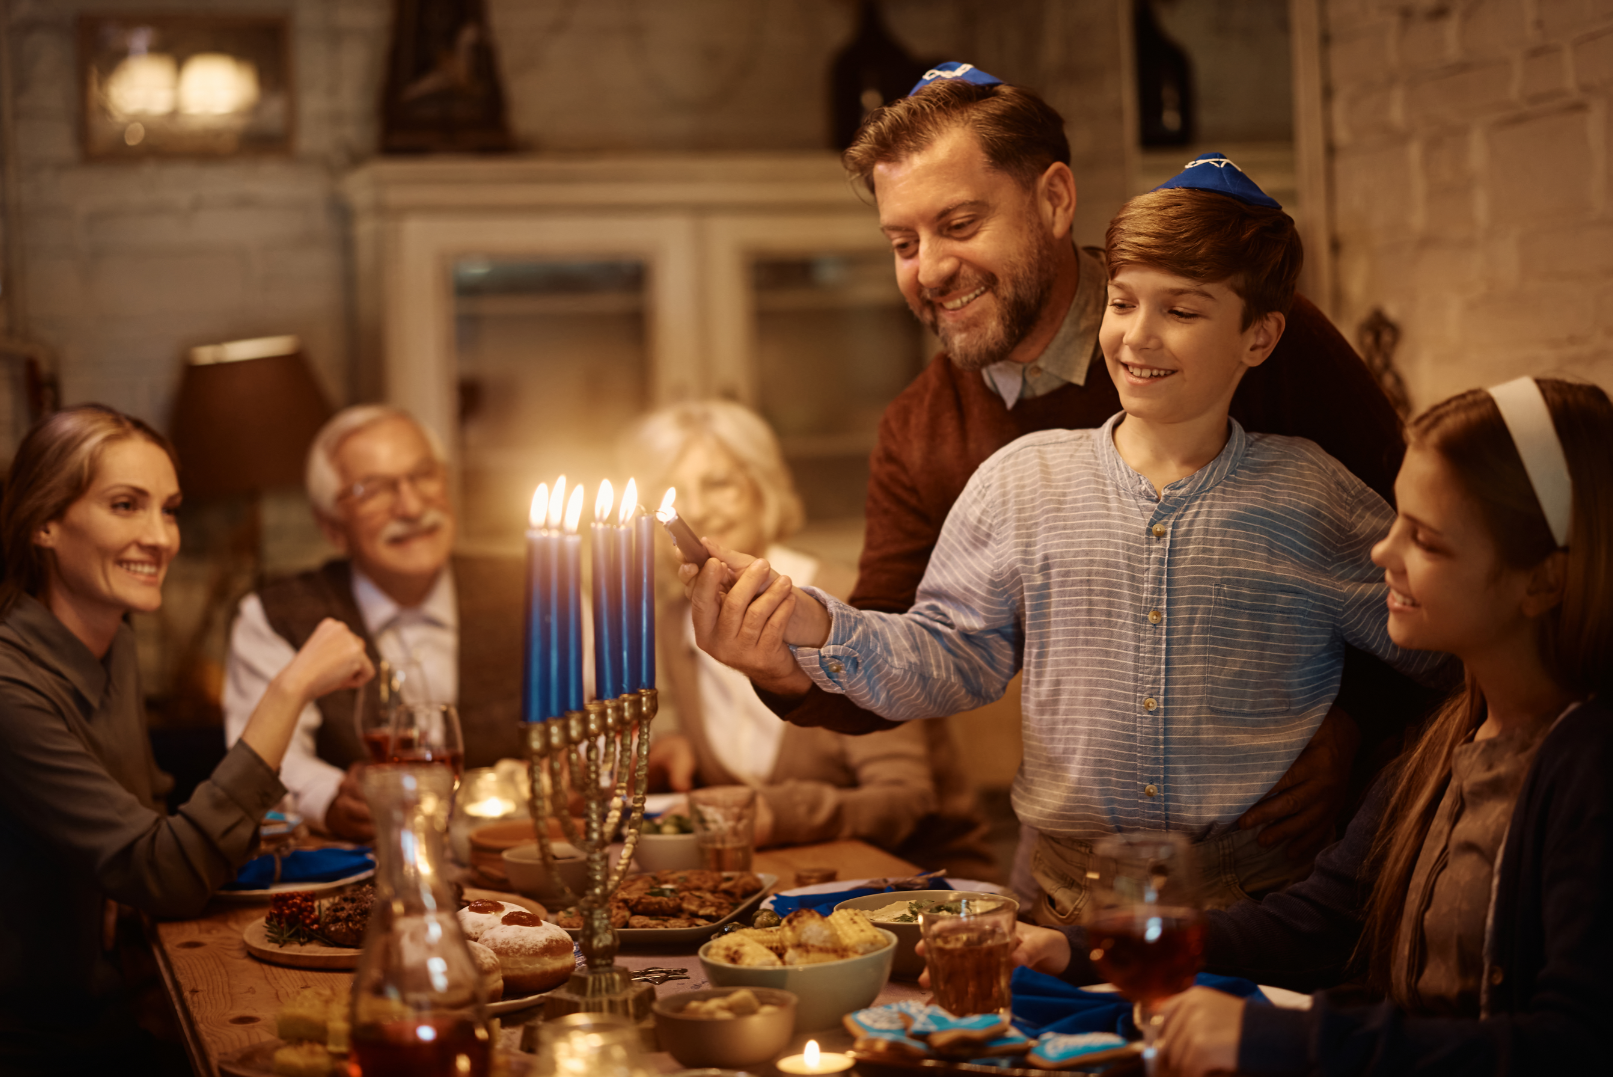 A family is sitting at a table lighting candles on a menorah.